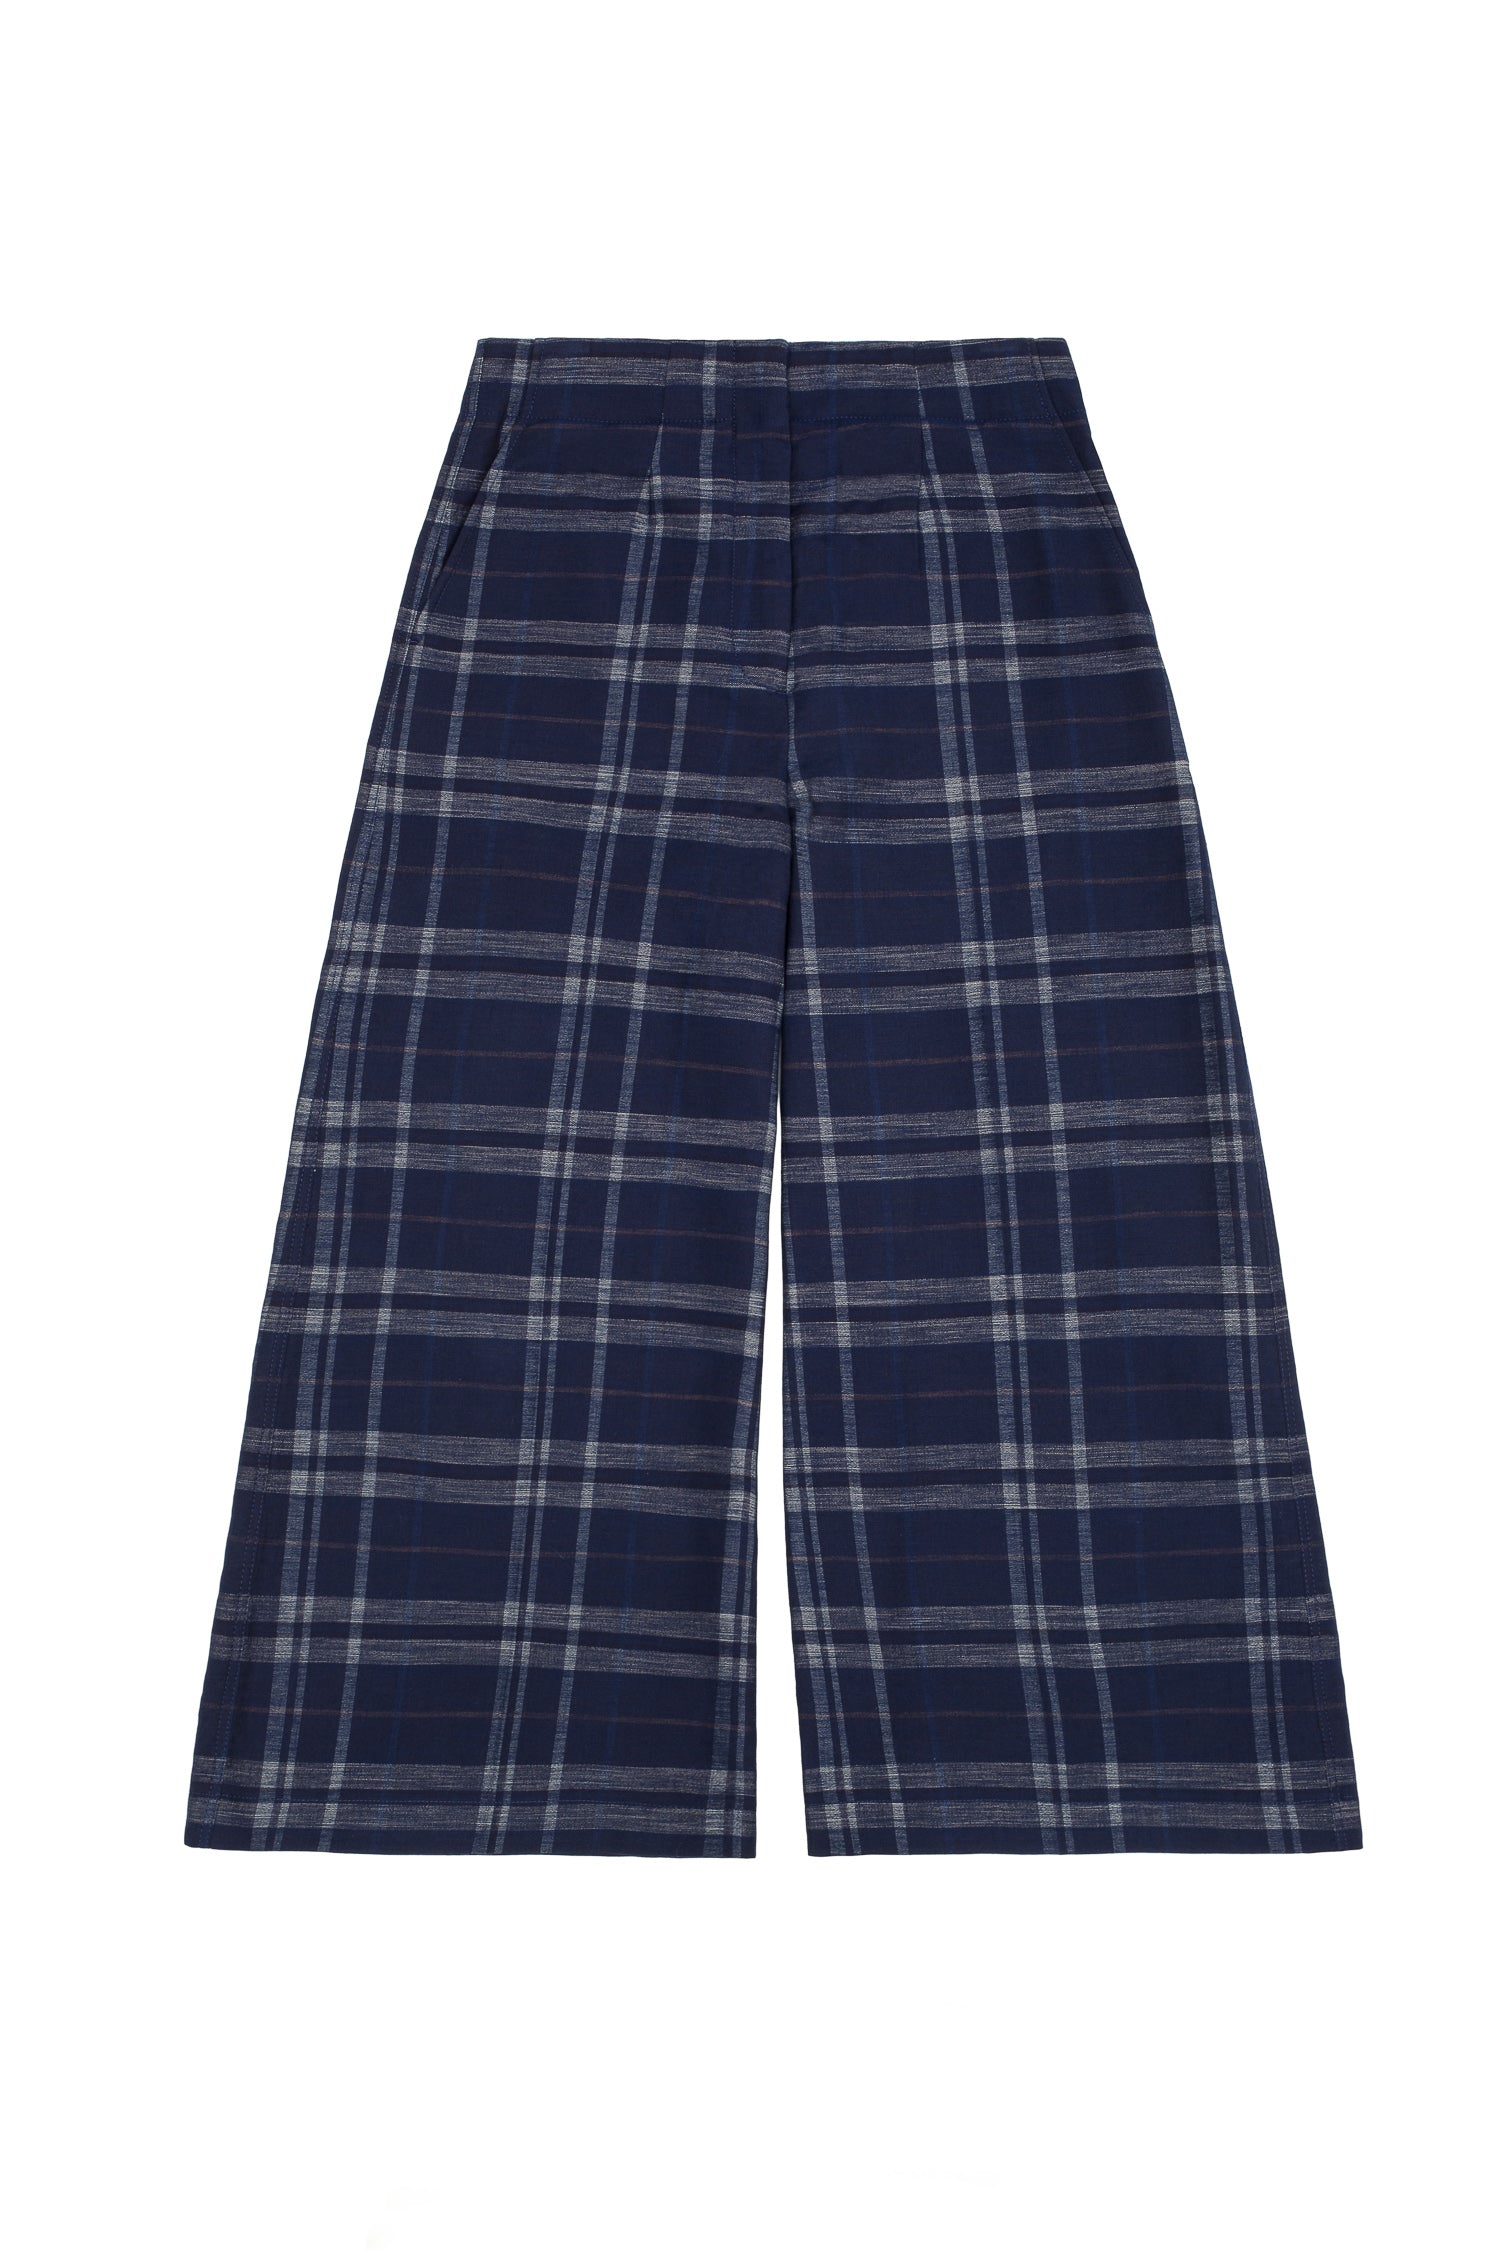 Womens wide leg culotte trouser in navy check. Amelia Wide Leg Trouser by Saywood.